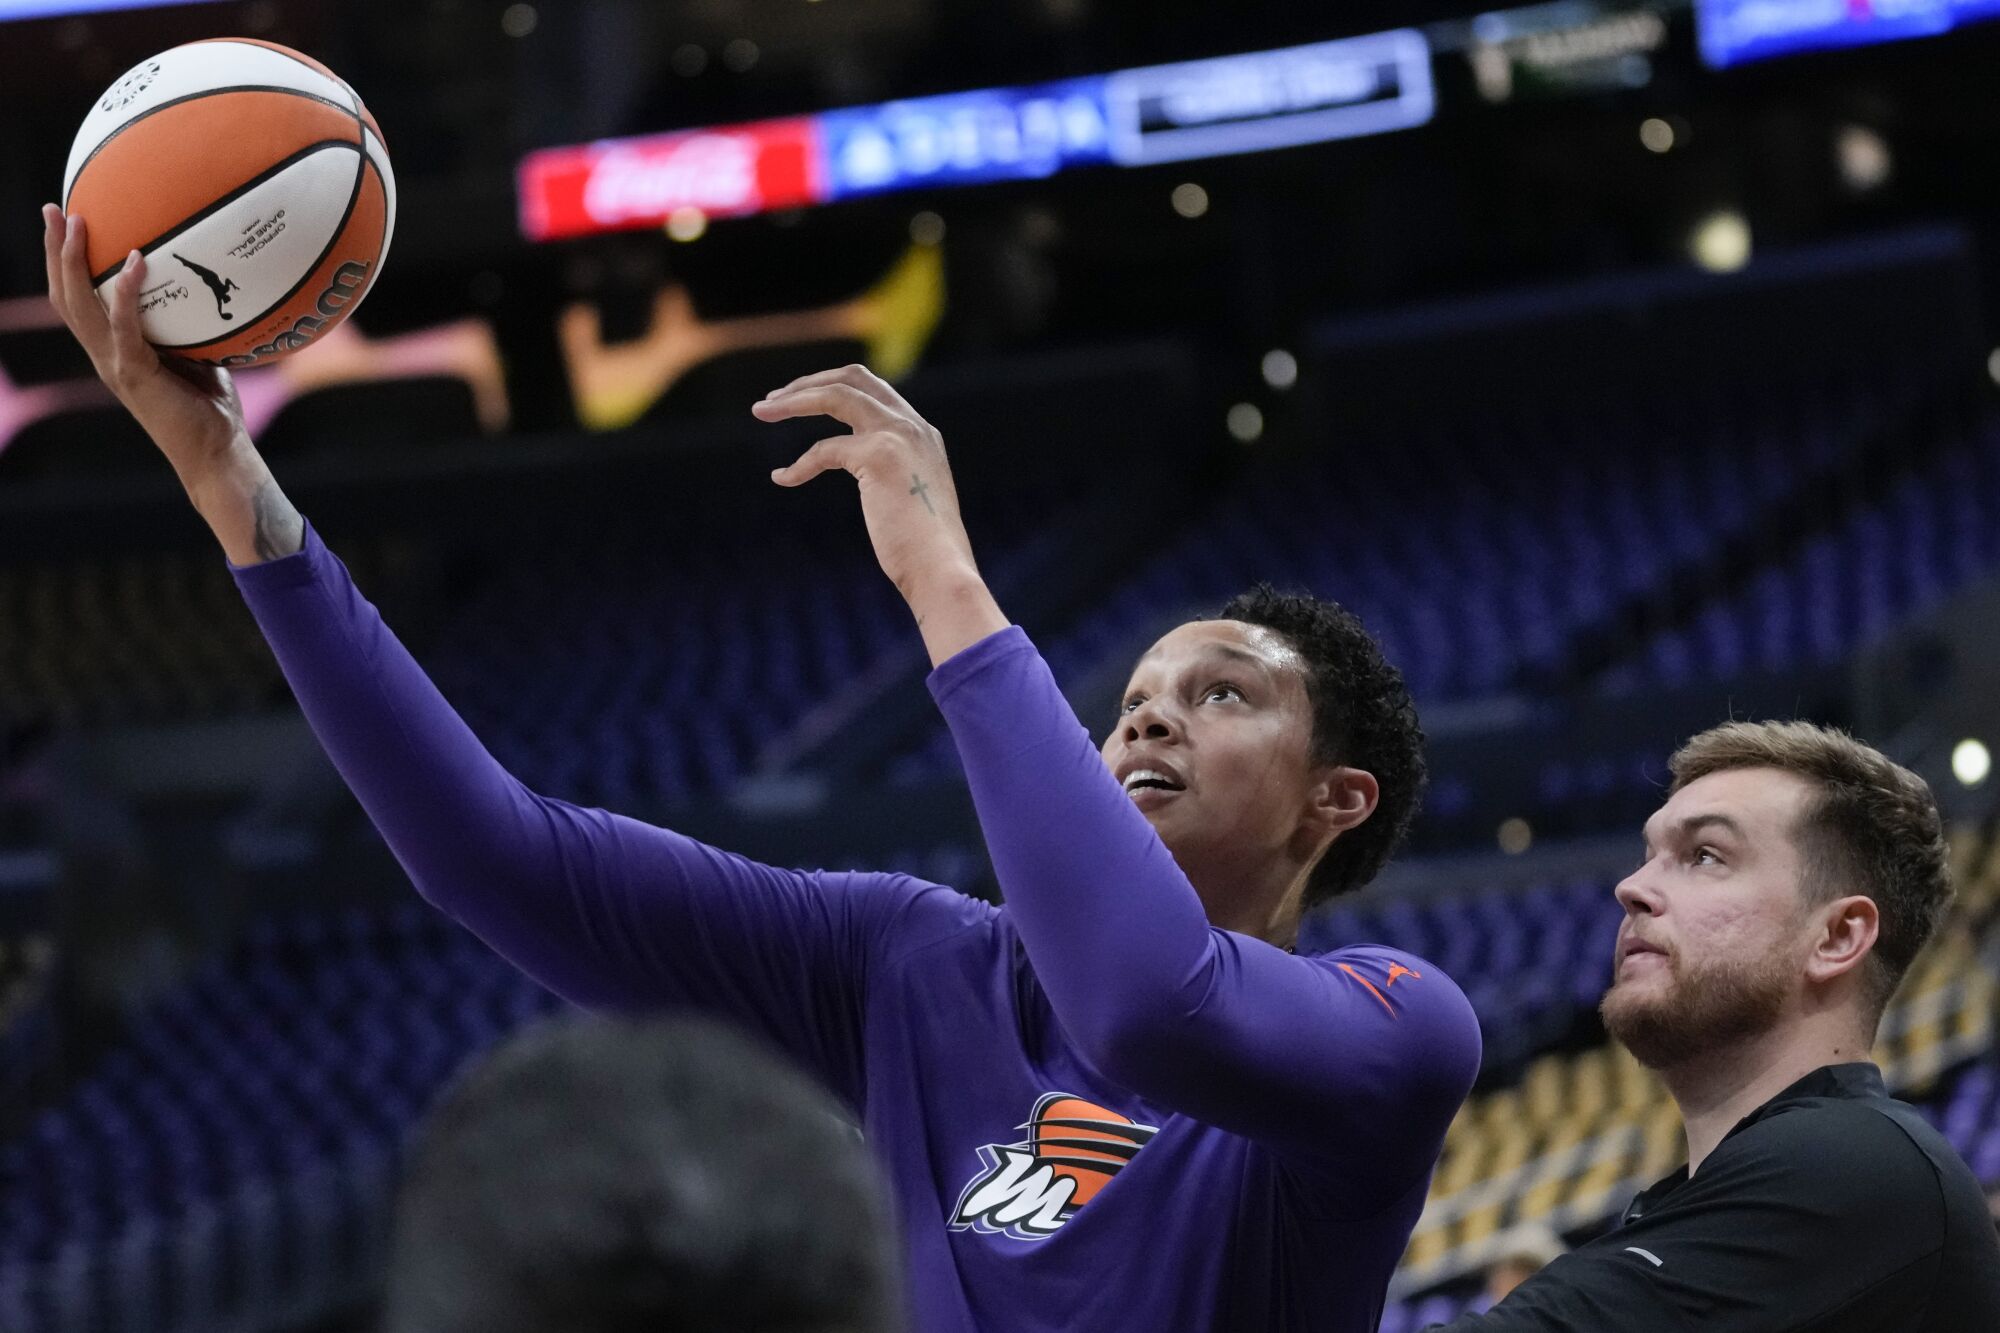 Phoenix Mercury center Brittney Griner shoots a ball under pressure from a staff member as she warms up